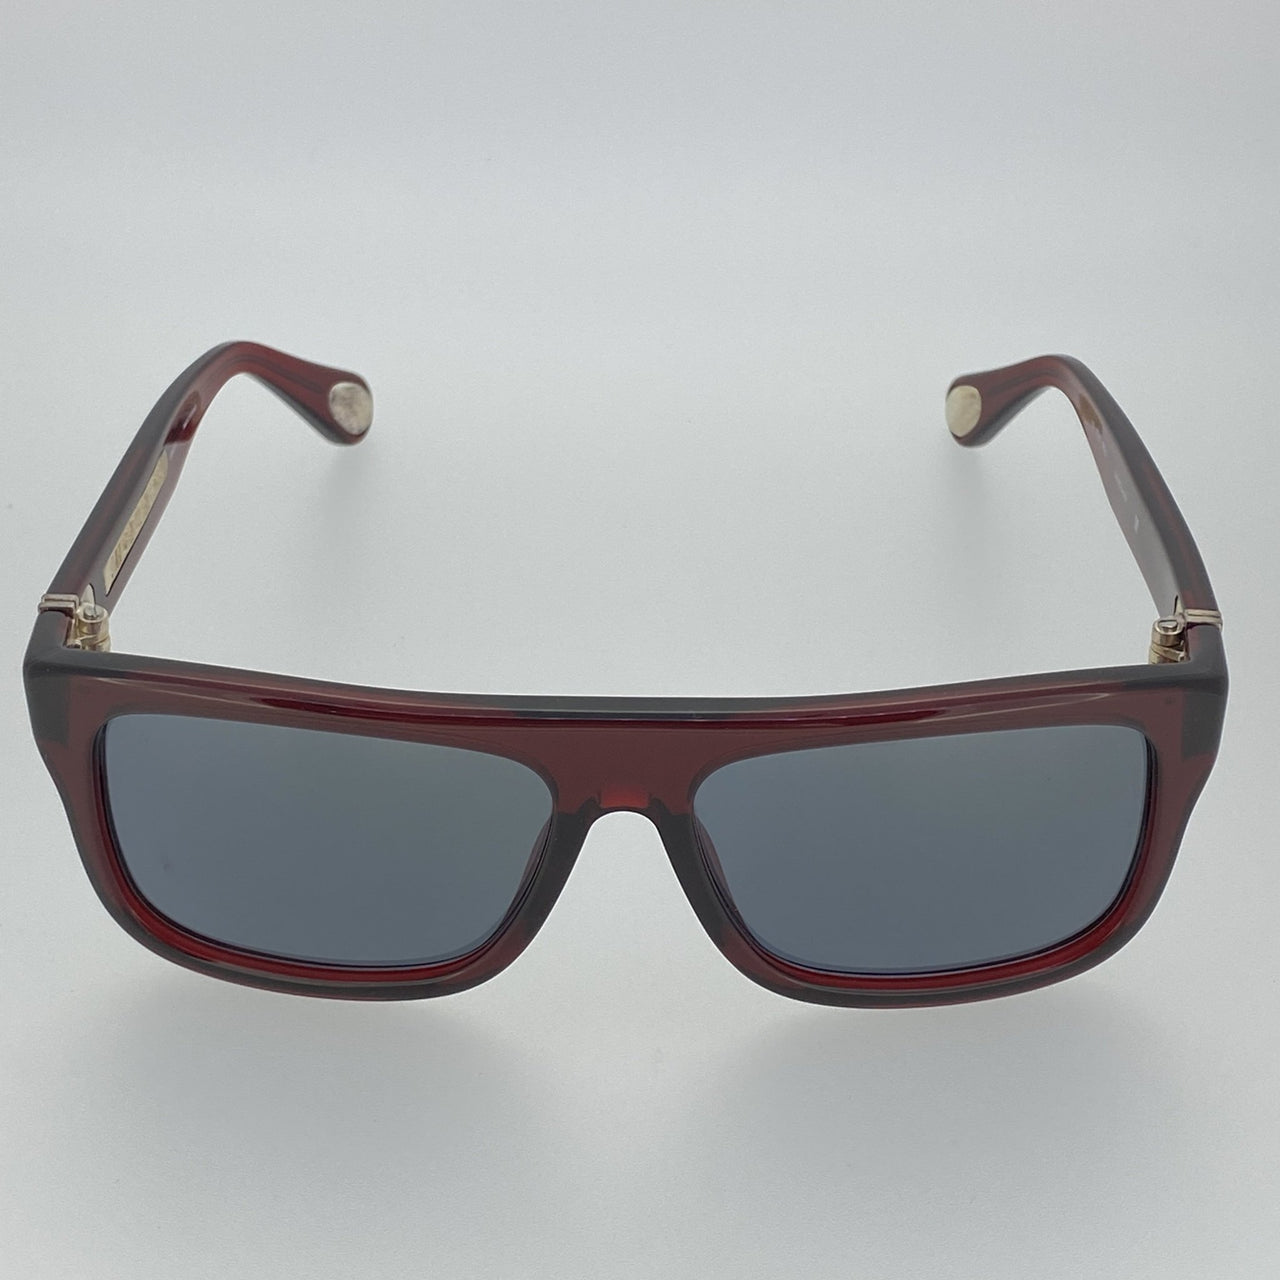 Ann Demeulemeester Sunglasses Flat Top Bordeaux Red 925 Silver with Blue Lenses AD2C3SUN - Watches & Crystals